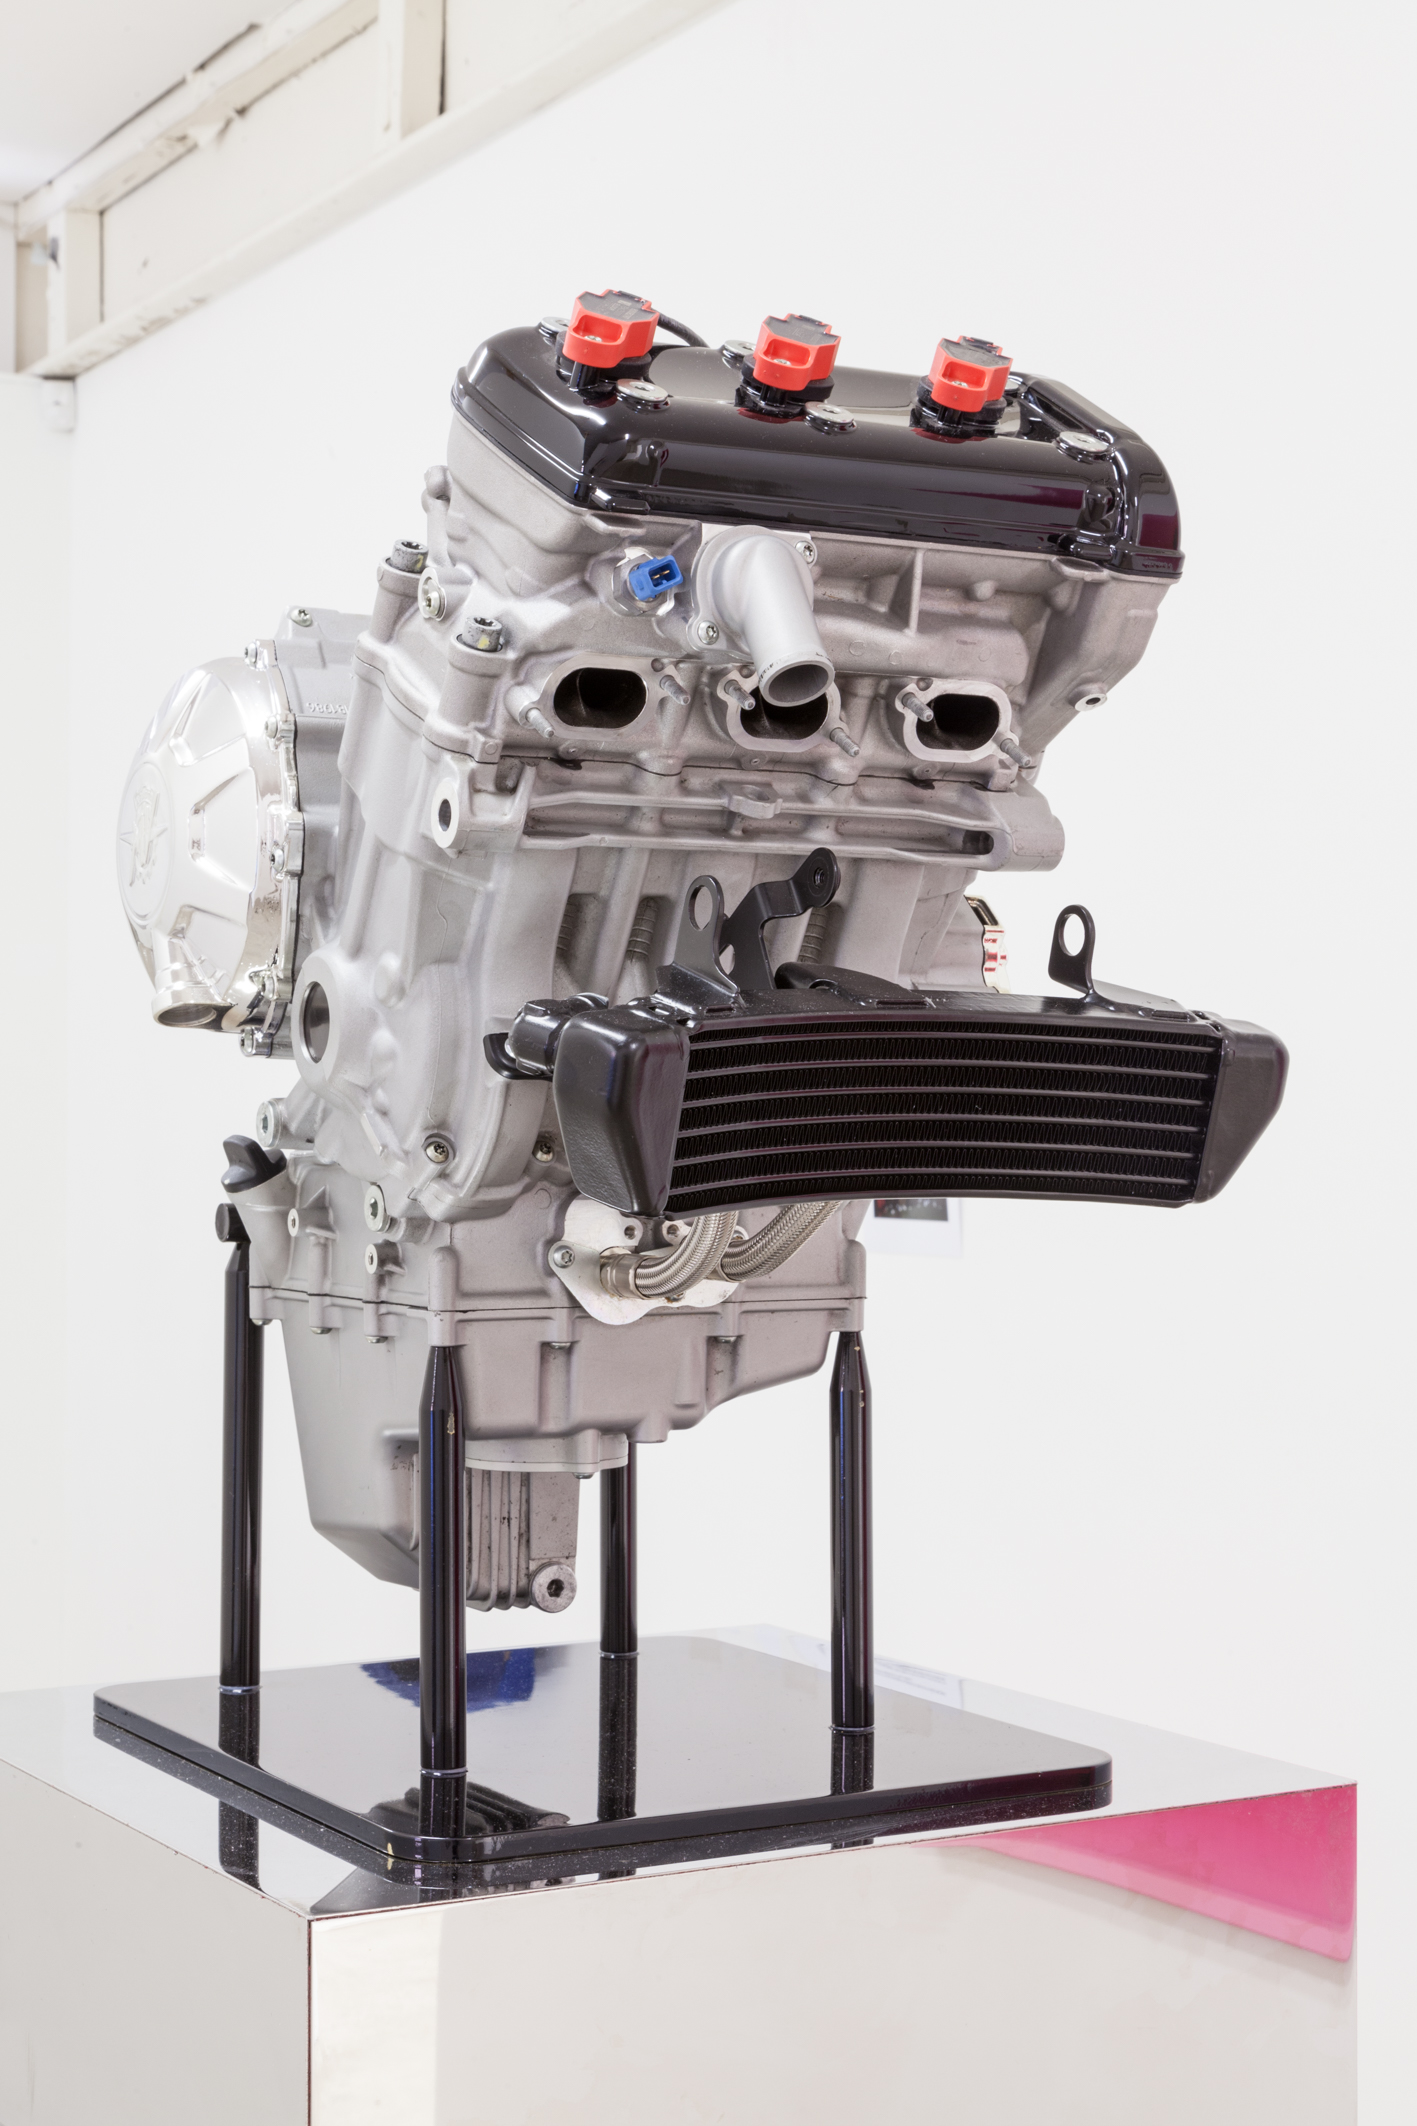 James Deutsher, “An education in exposure”, 2011/15, MV Agusta 675cc three cylinder dry engine with chrome and powder coat detailing, powder coated steel frame, dimensions variable